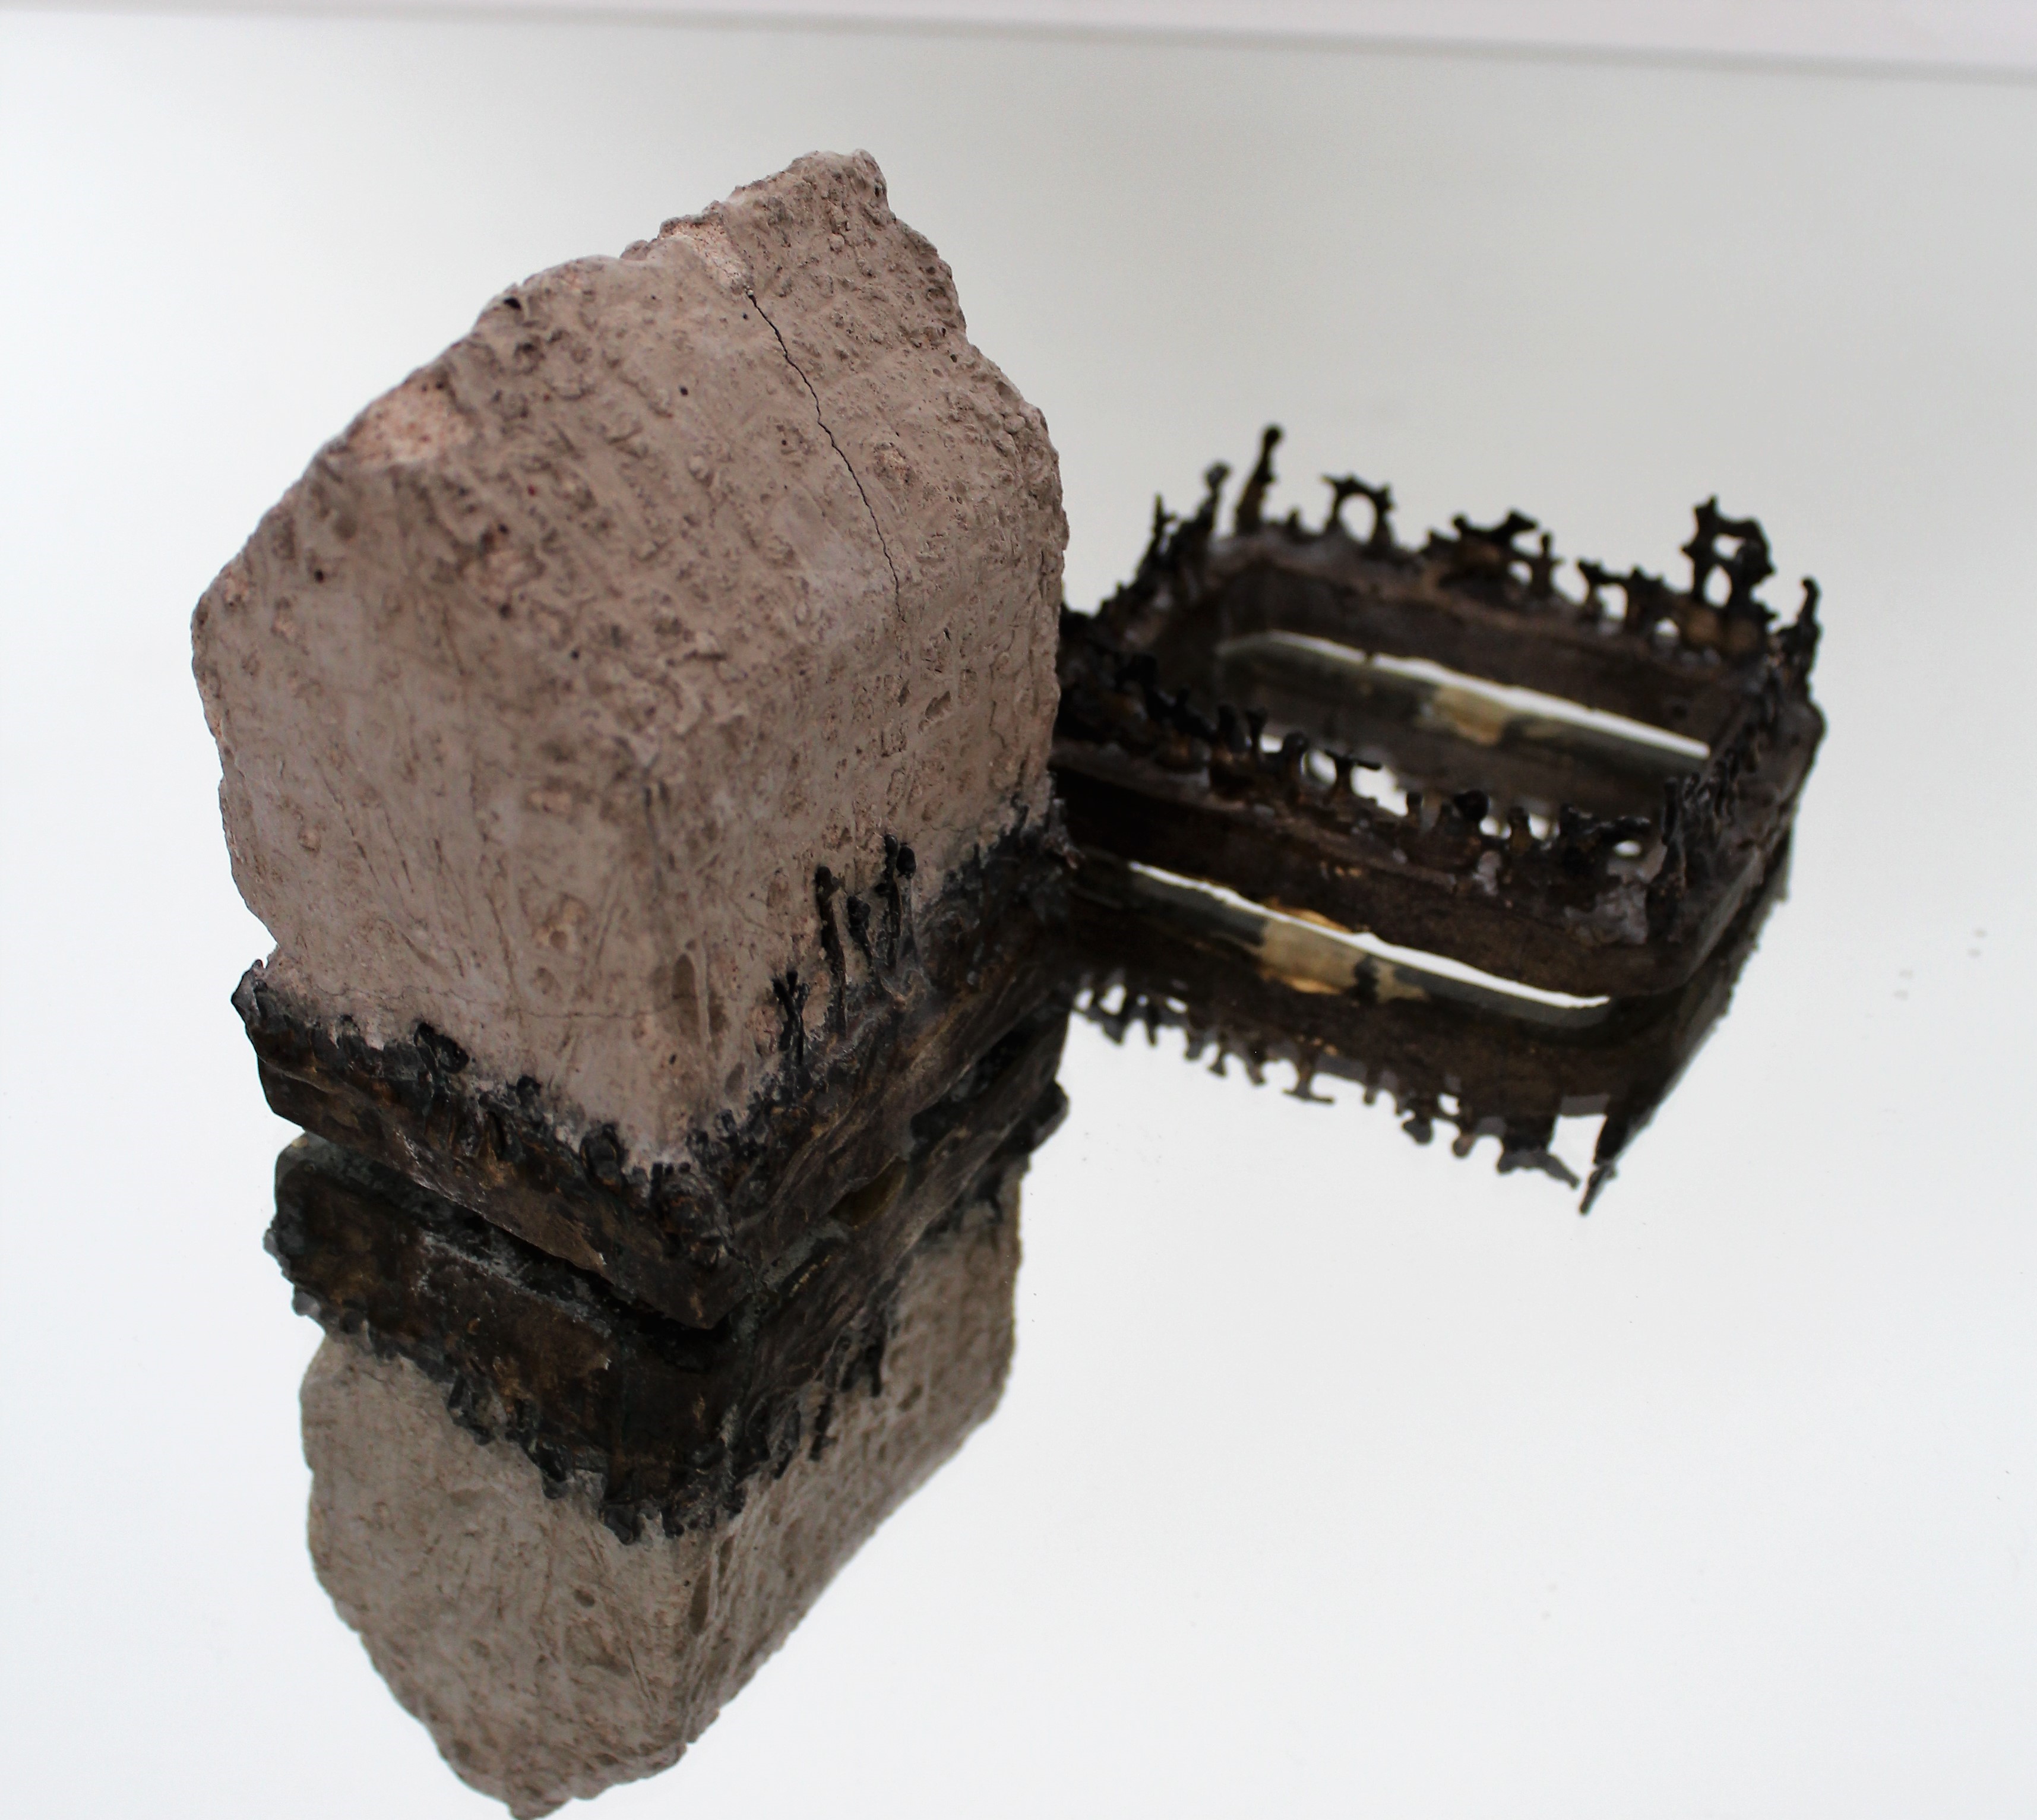 Sculpture by Jo Bellamy. Two small bronze forms, one with a plaster house form attached, the second only a base of a similar size, with the remnants of mesh sides visible. Placed on a mirrored base.